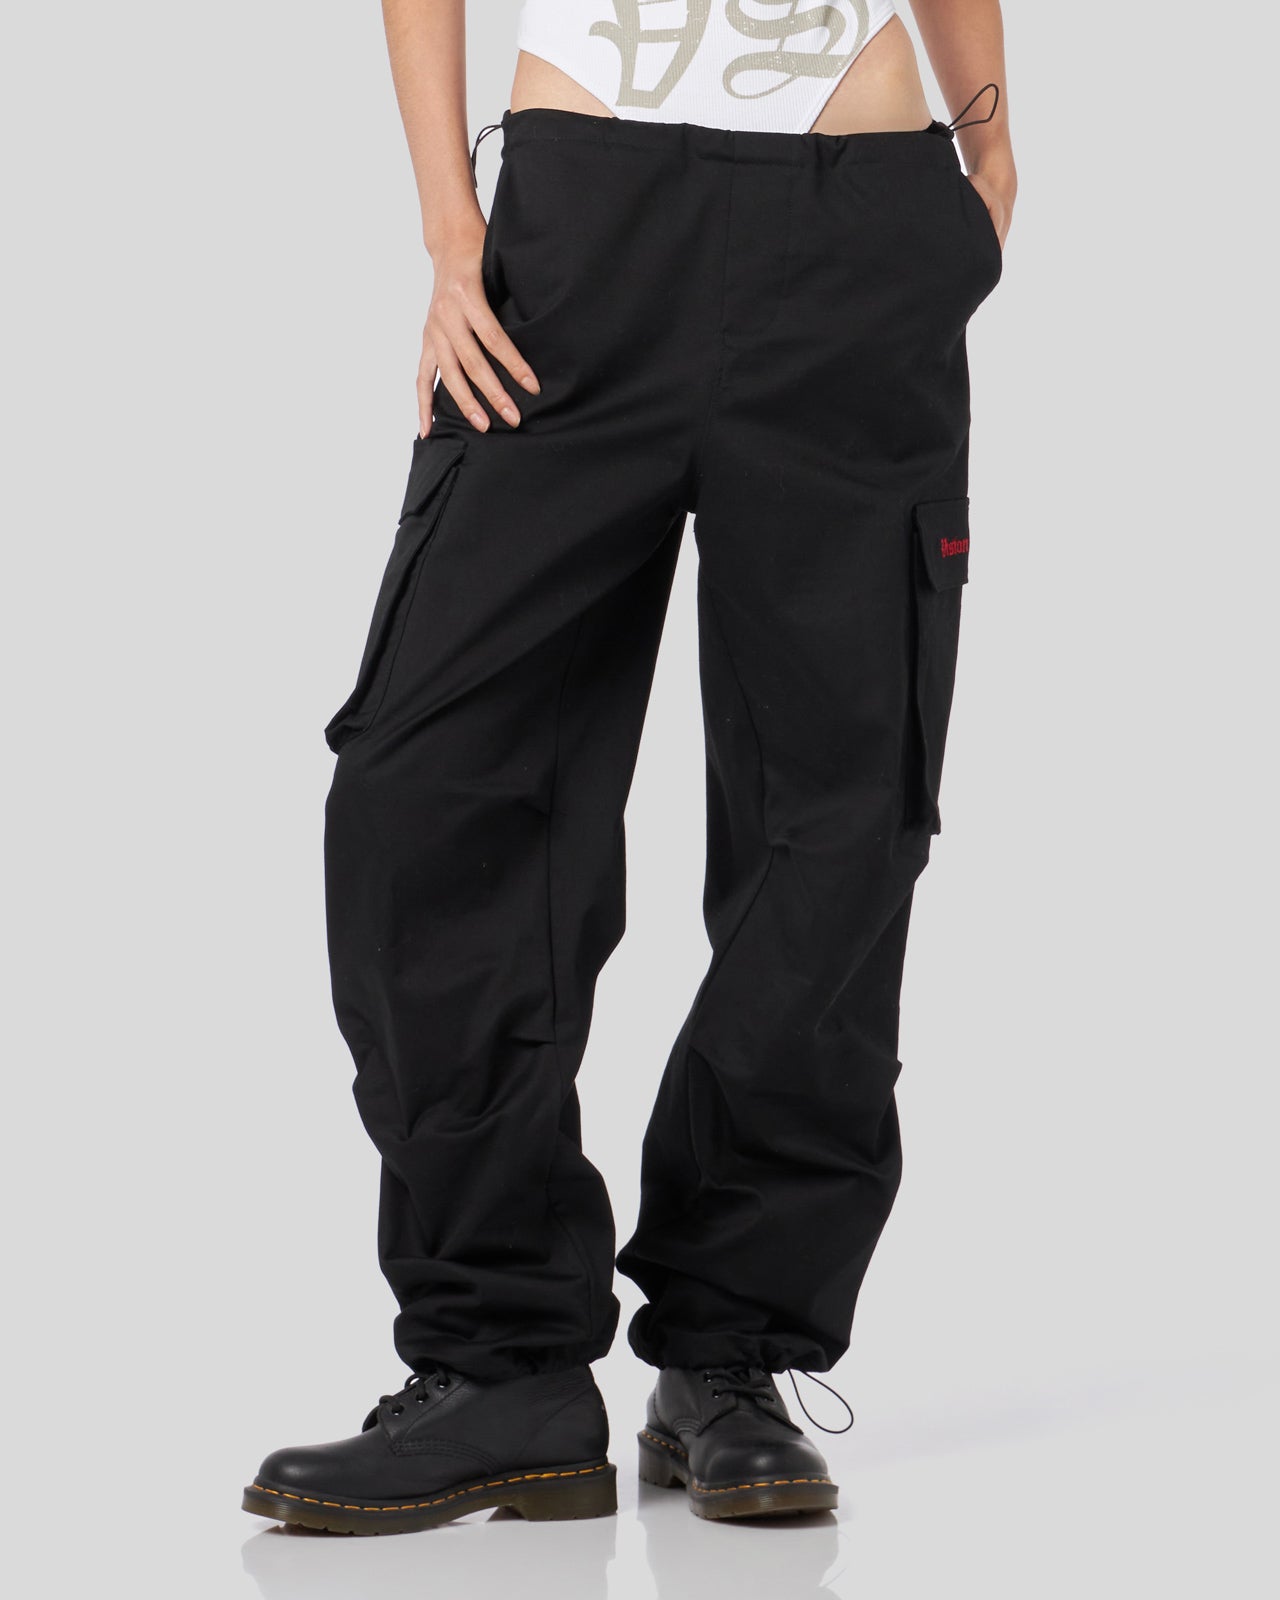 BLACK CARGO PANTS WITH EMBROIDERED GOTIC LOGO